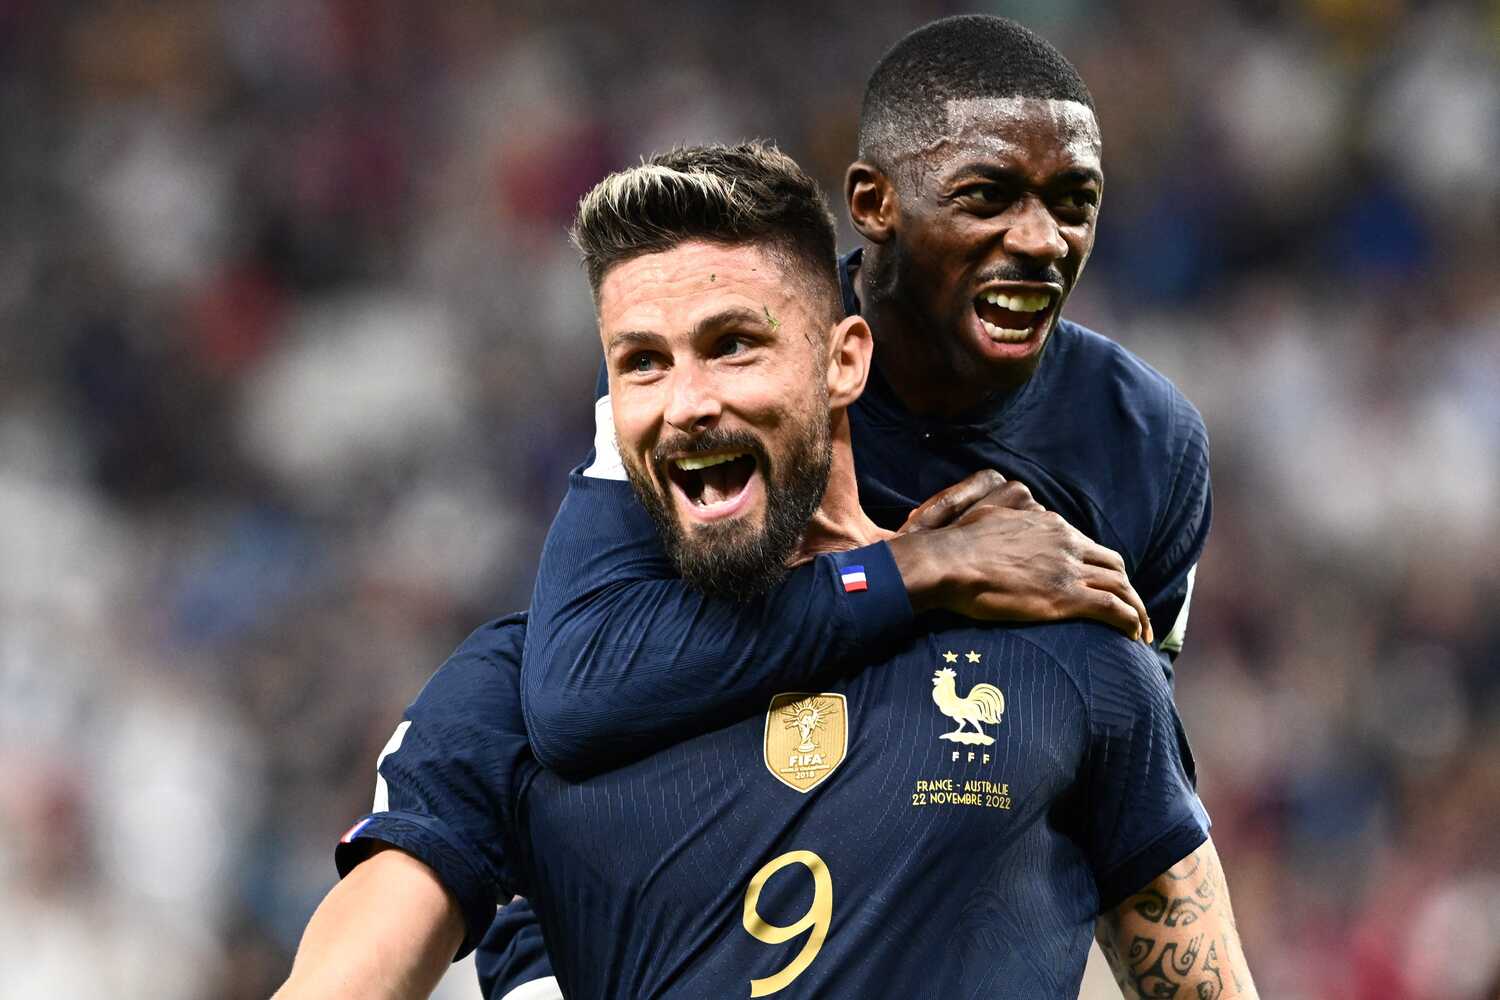 In a dominant win, France overcame an early goal from Australia to win 4-1. Les Bleus had many quality players, including Kylian Mbappe and Olivier Giroud